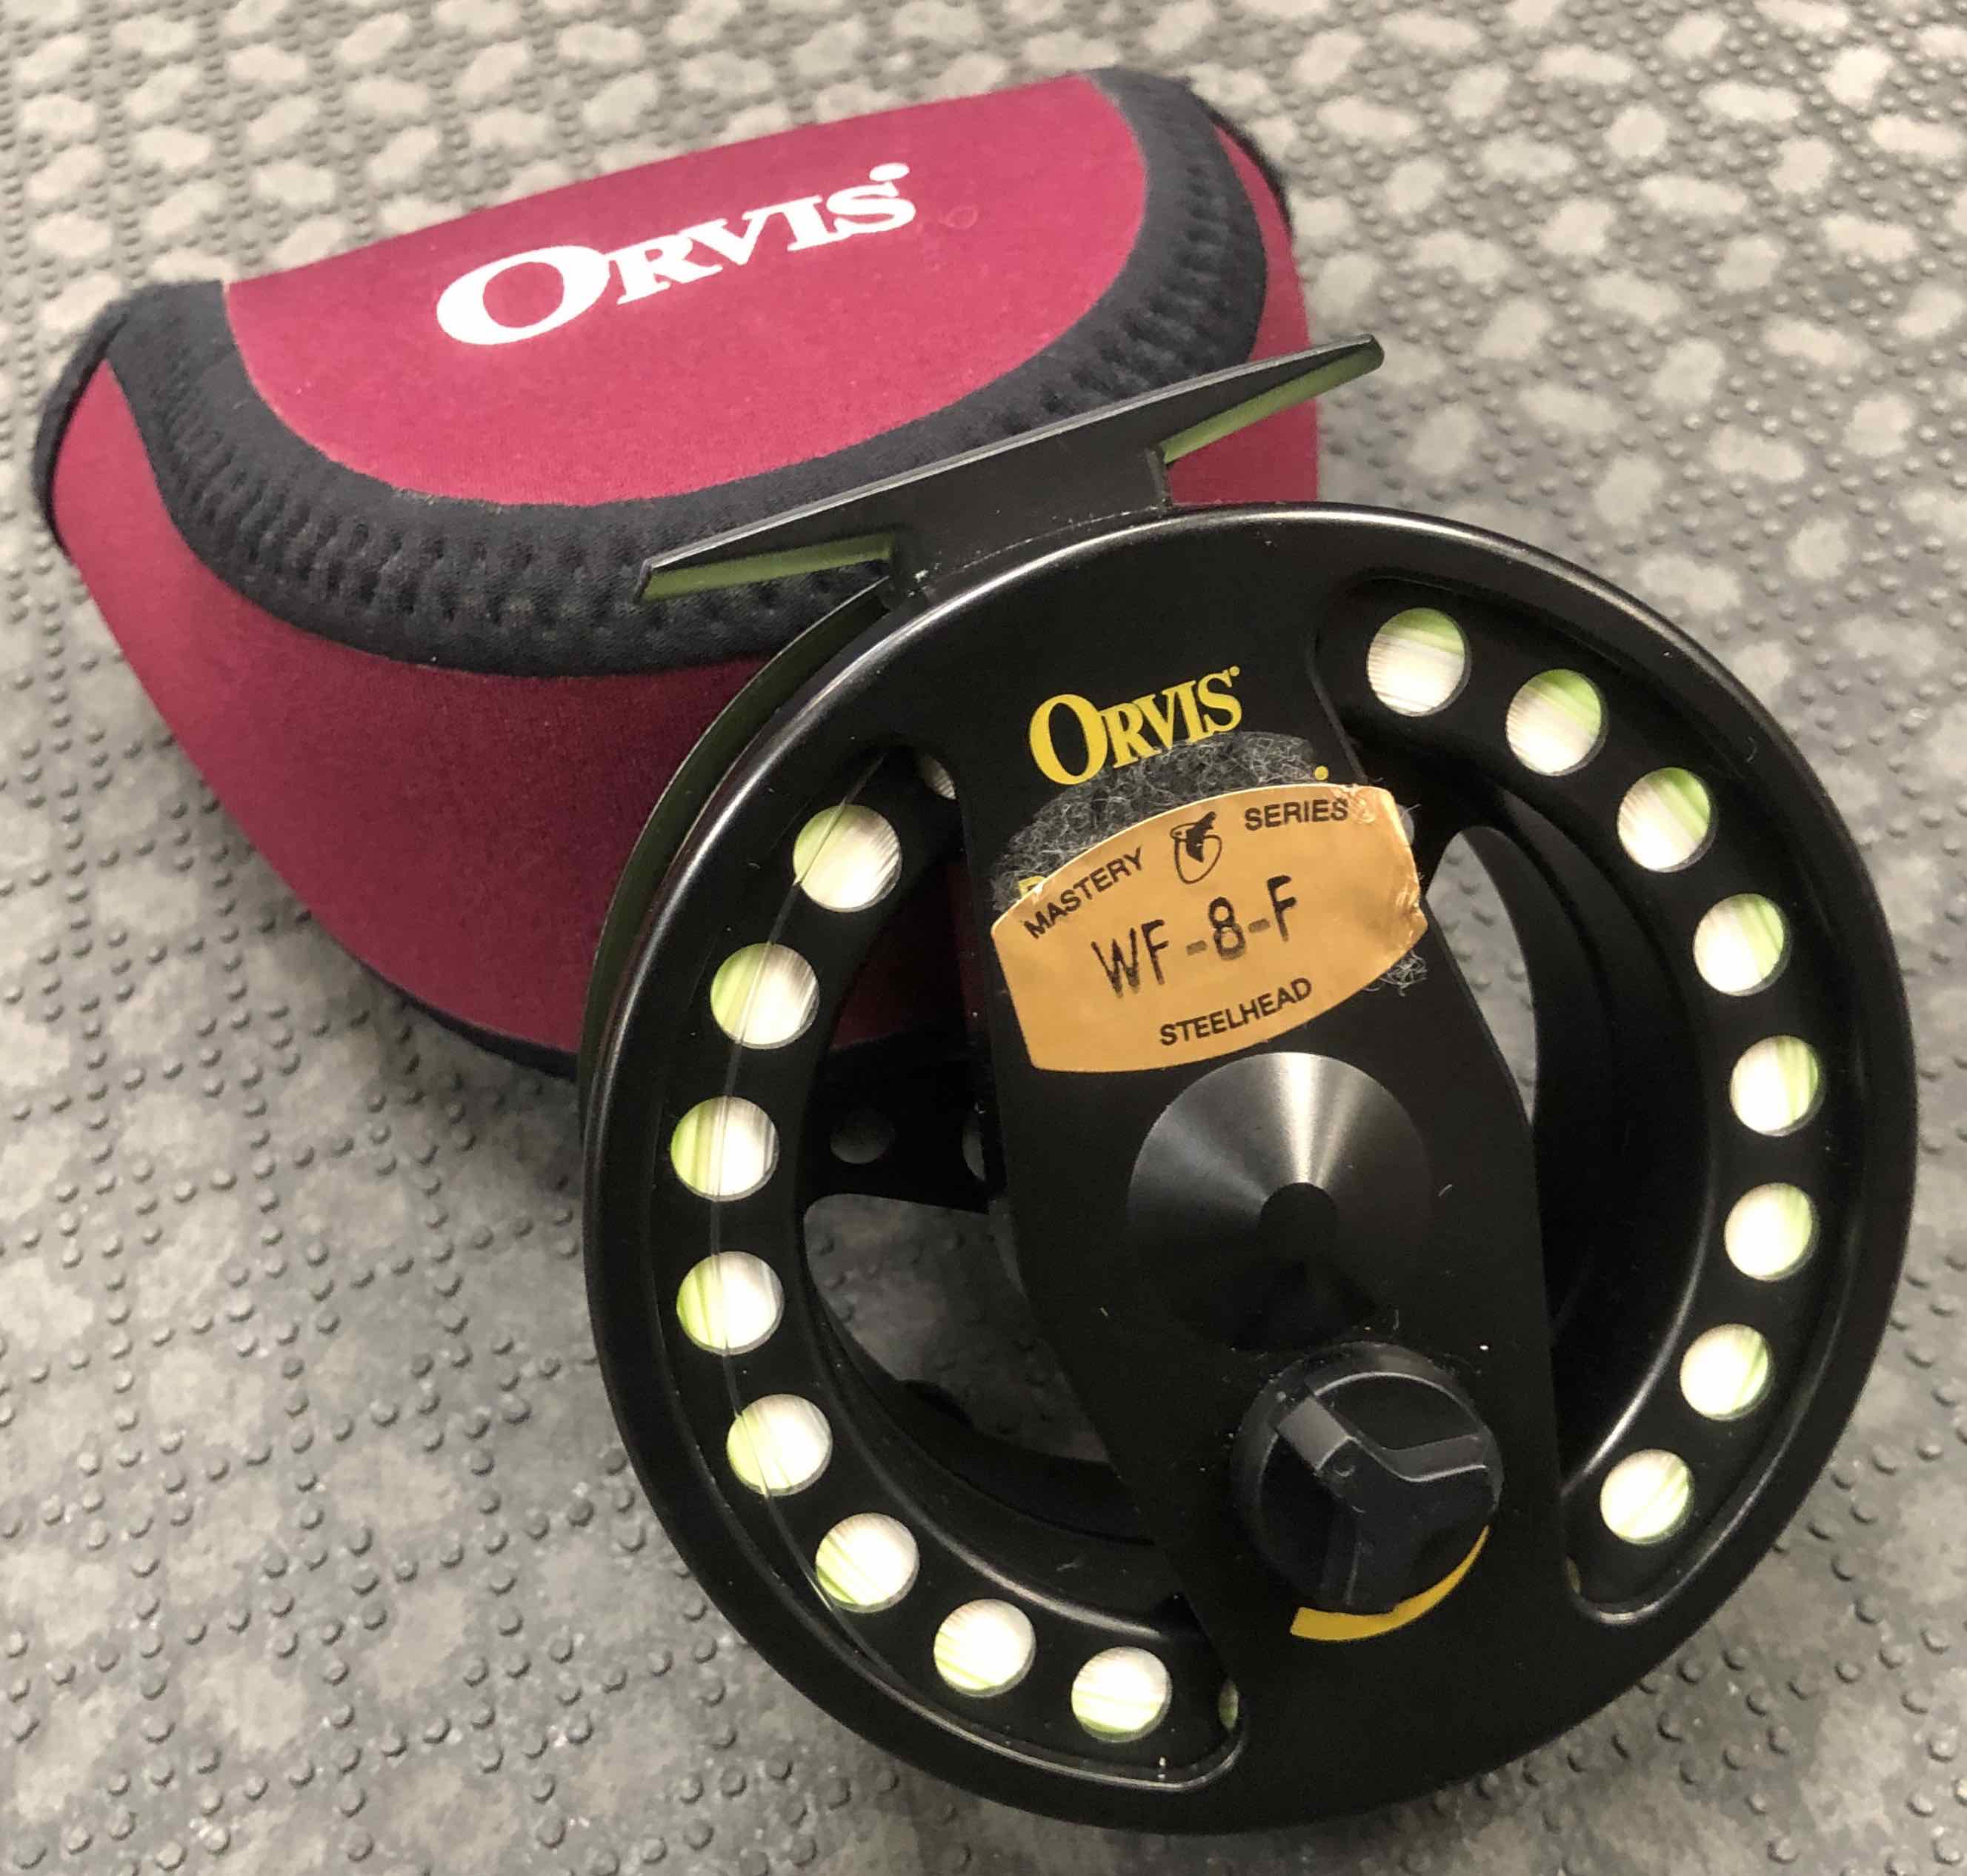 Orvis Battenkill - Made in England Fly Reel - Black - C/W A Scientific Anglers WF8F Fly Line - GREAT SHAPE! - $150